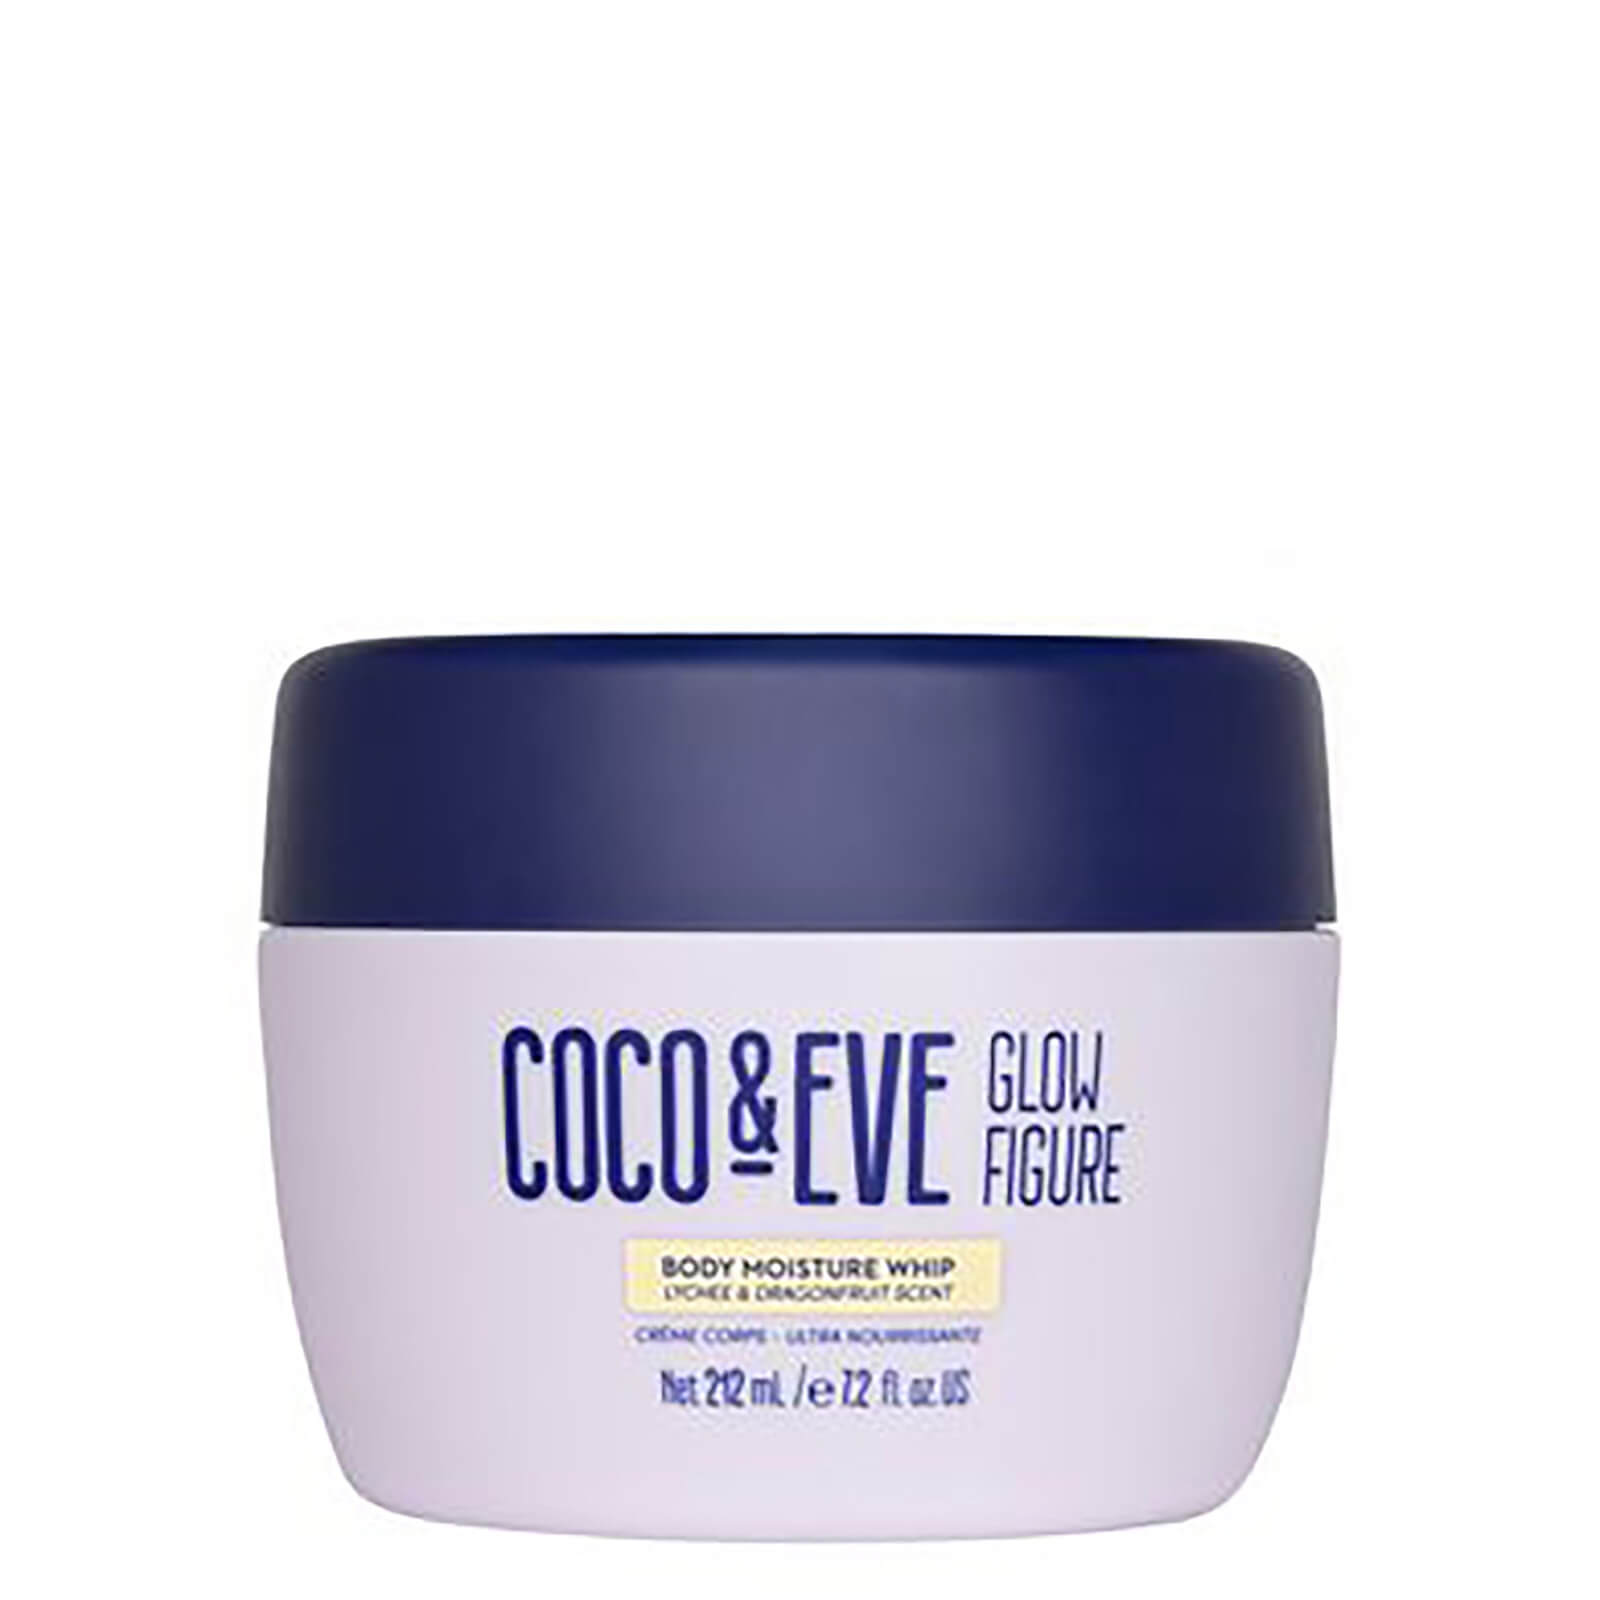 Image of Coco & Eve Glow Figure Whipped Body Cream (Various Sizes) - 212ml